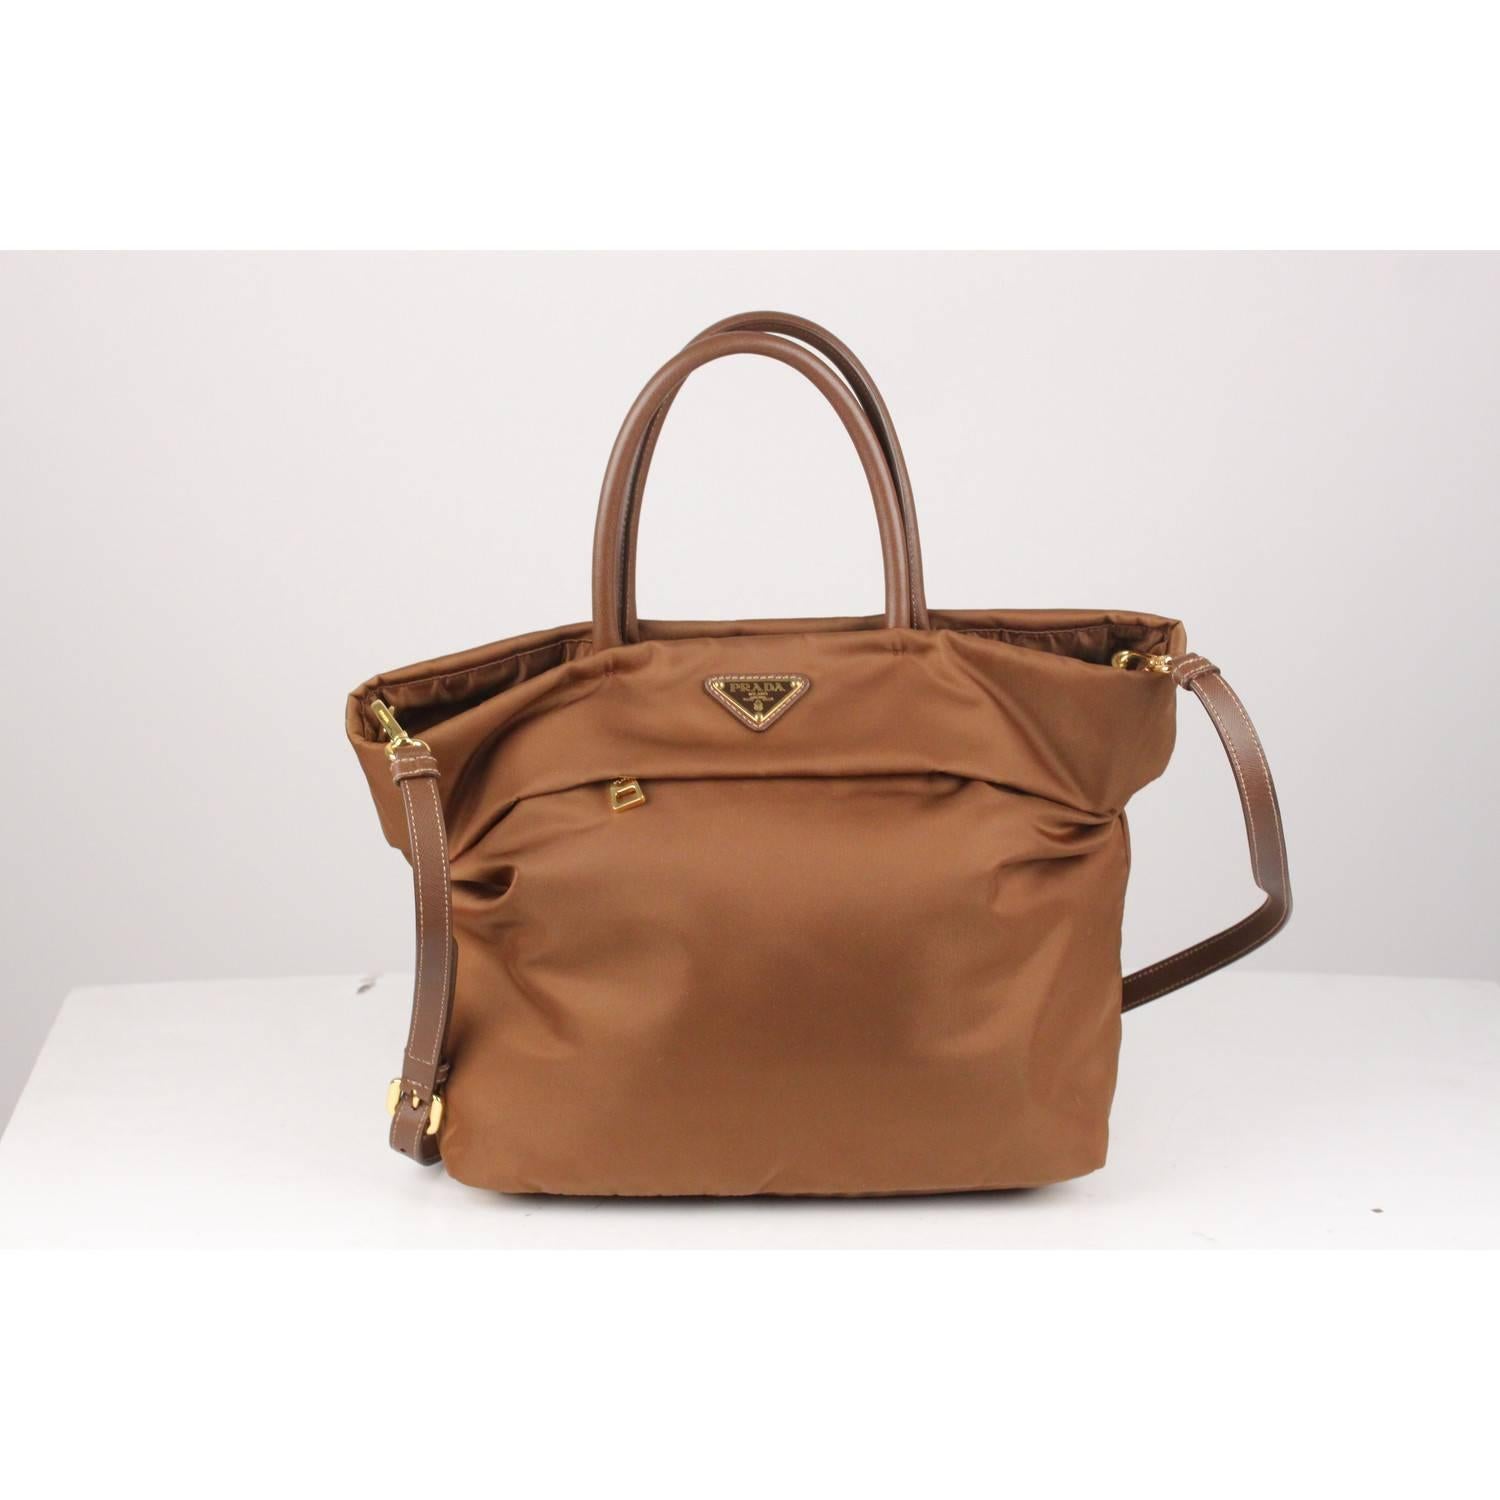 - PRADA Brown tote bag, mod. BN2531
- Prada official color is 'Corinto'
- Tessuto Nylon with Saffiano Leather Trim, handles and shoulder strap
- Gold metal hardware
- Prada triangle logo on the front
- 2 Concealed Exterior  Zip Pockets
- Detachable